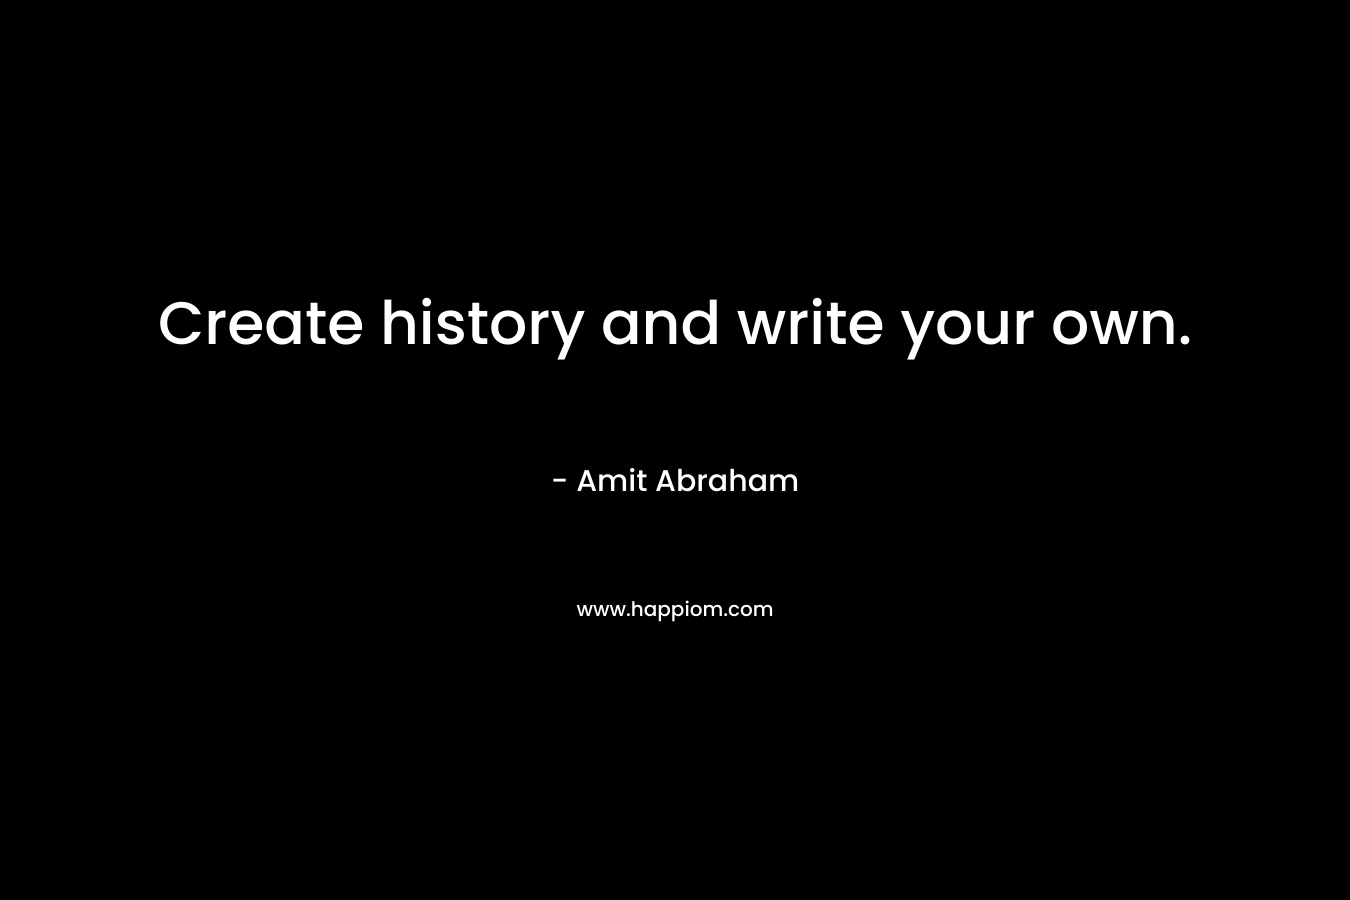 Create history and write your own. – Amit Abraham